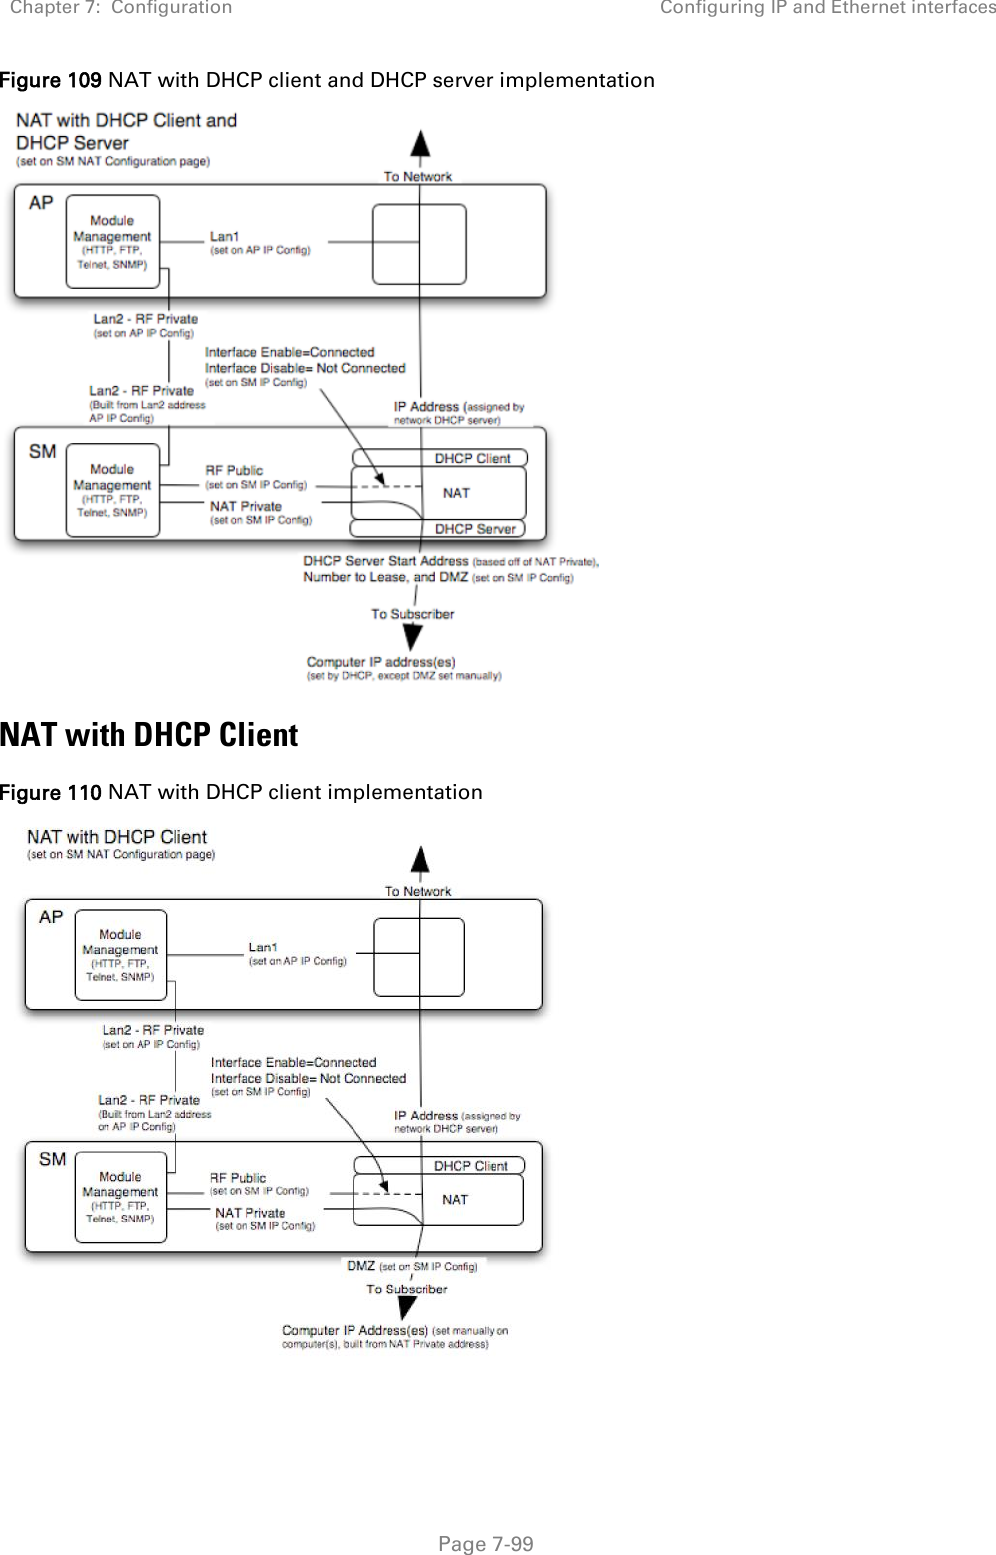 Chapter 7:  Configuration Configuring IP and Ethernet interfaces   Page 7-99 Figure 109 NAT with DHCP client and DHCP server implementation  NAT with DHCP Client Figure 110 NAT with DHCP client implementation  